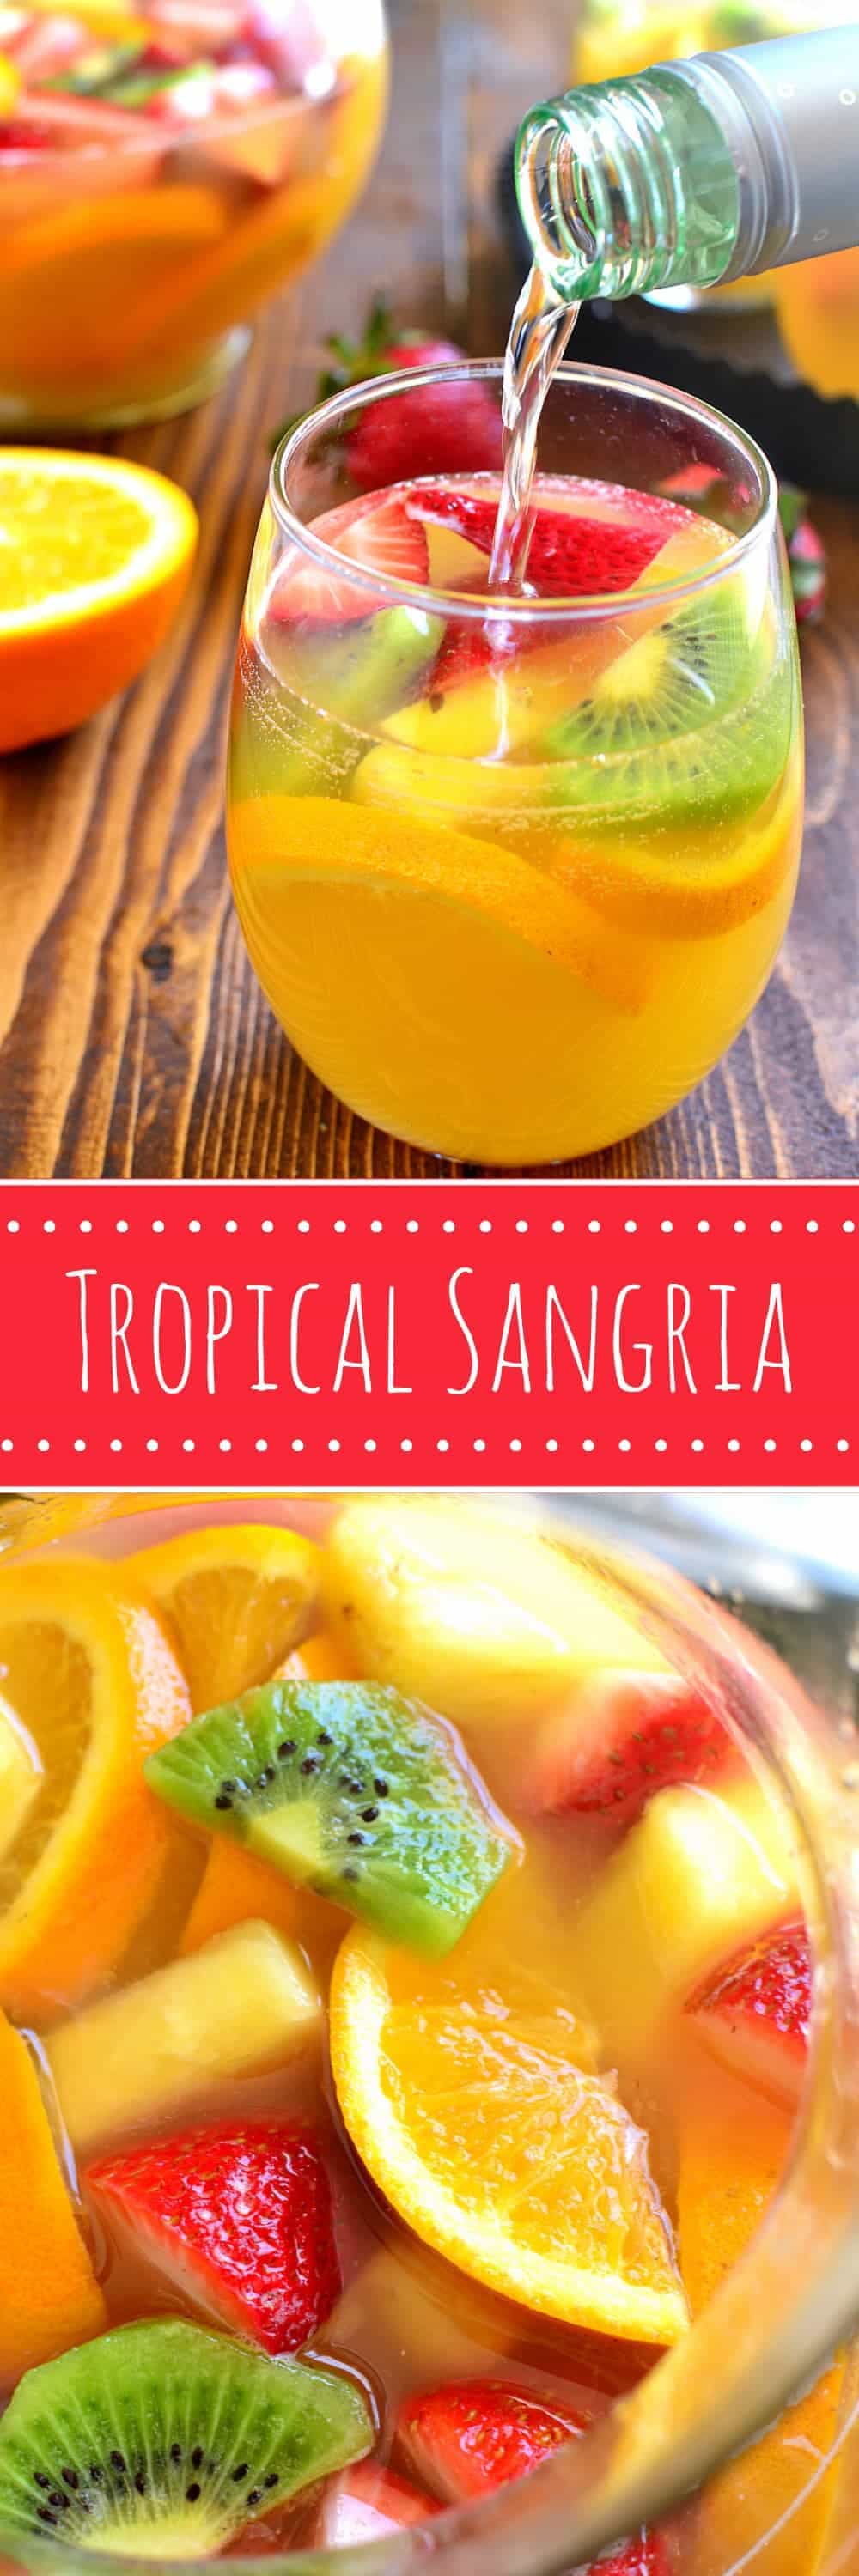 titled photo collage - Tropical Sangria